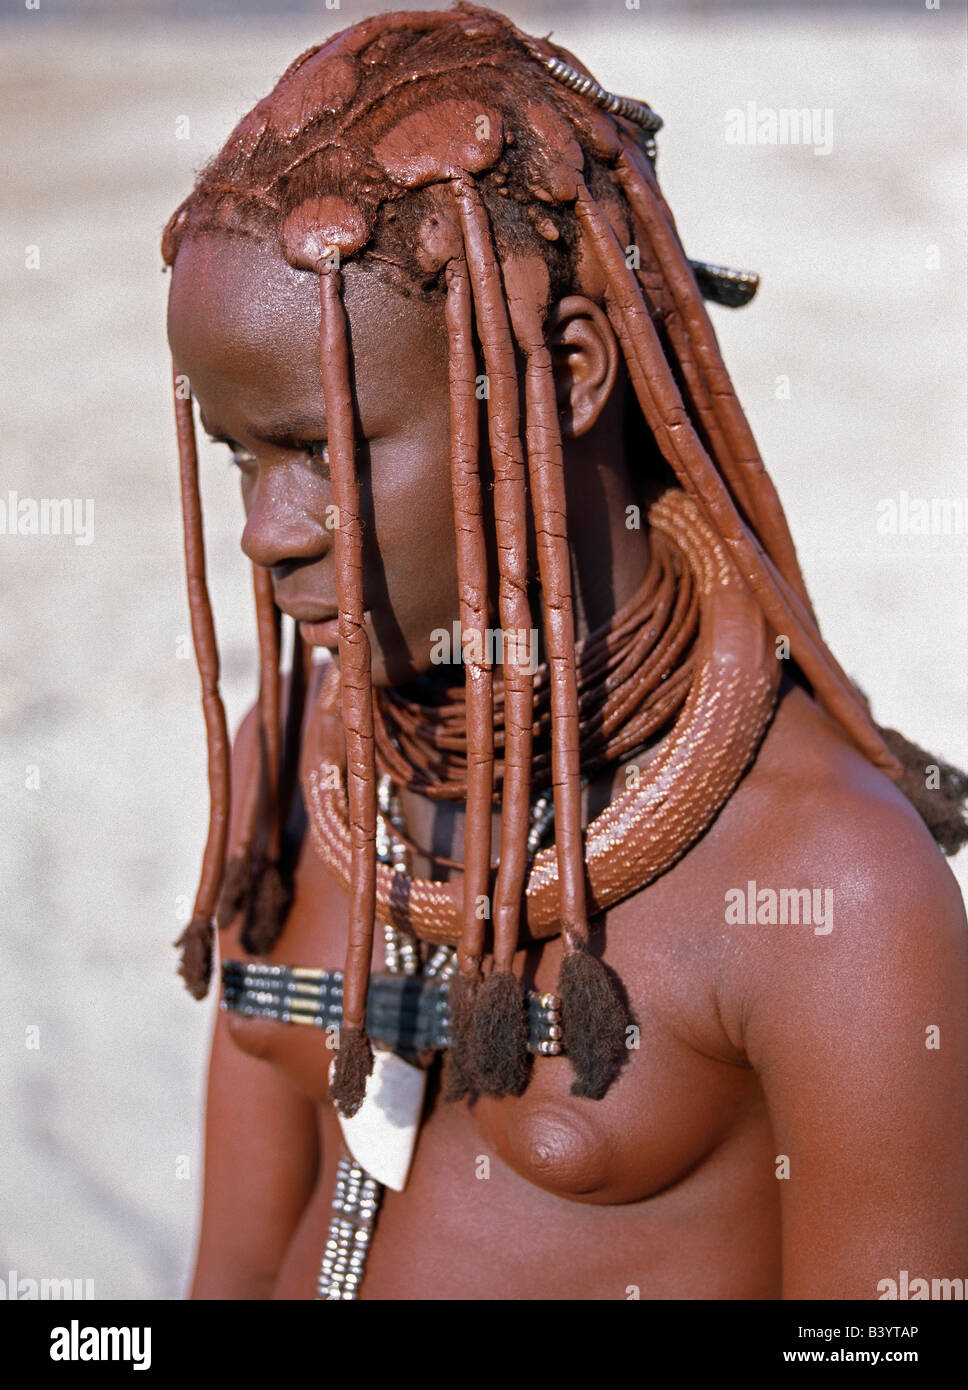 Namibia, Kaokoland, Empembe. A young Himba girl in traditional attire. Her body gleams from a mixture of red ochre, butterfat and herbs. Her long hair is styled in the traditional Himba way. Her large, round white-beaded necklace, called ombwari, is worn by both sexes.The Himba are Herero-speaking Bantu nomads who live in the harsh, dry but starkly beautiful landscape of remote northwest Namibia. Stock Photo